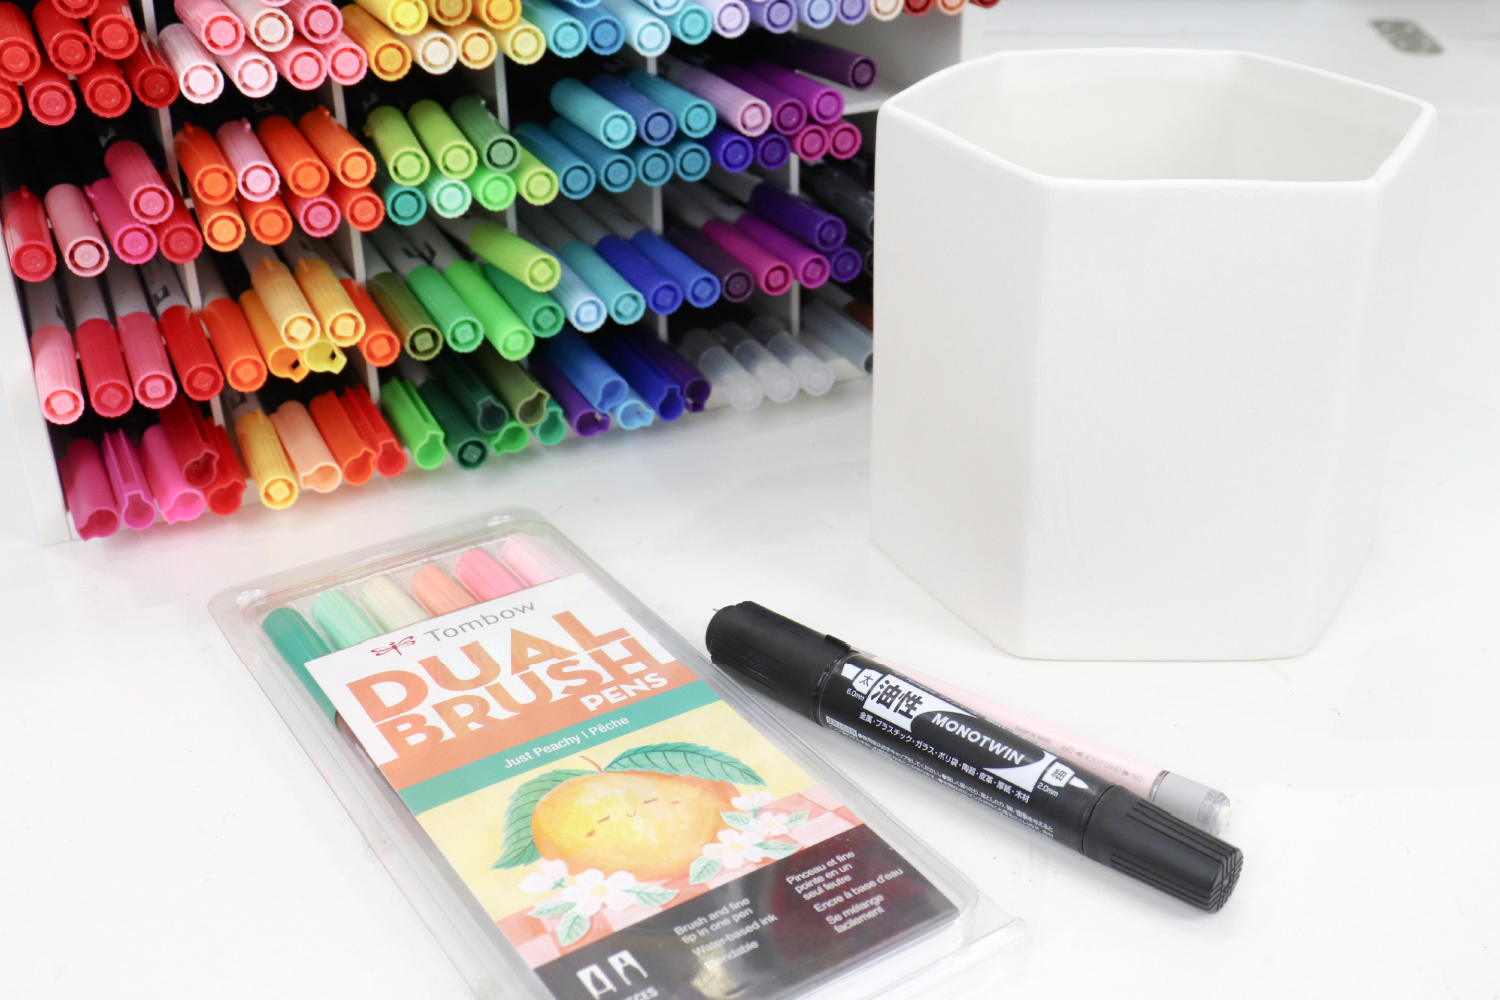 Image contains a white ceramic planter on a white table. Next to it are a pink mechanical pencil, a black permanent marker, and a pack of Dual Brush Pens. An organizer filled with rainbow colored markers sits in the background.